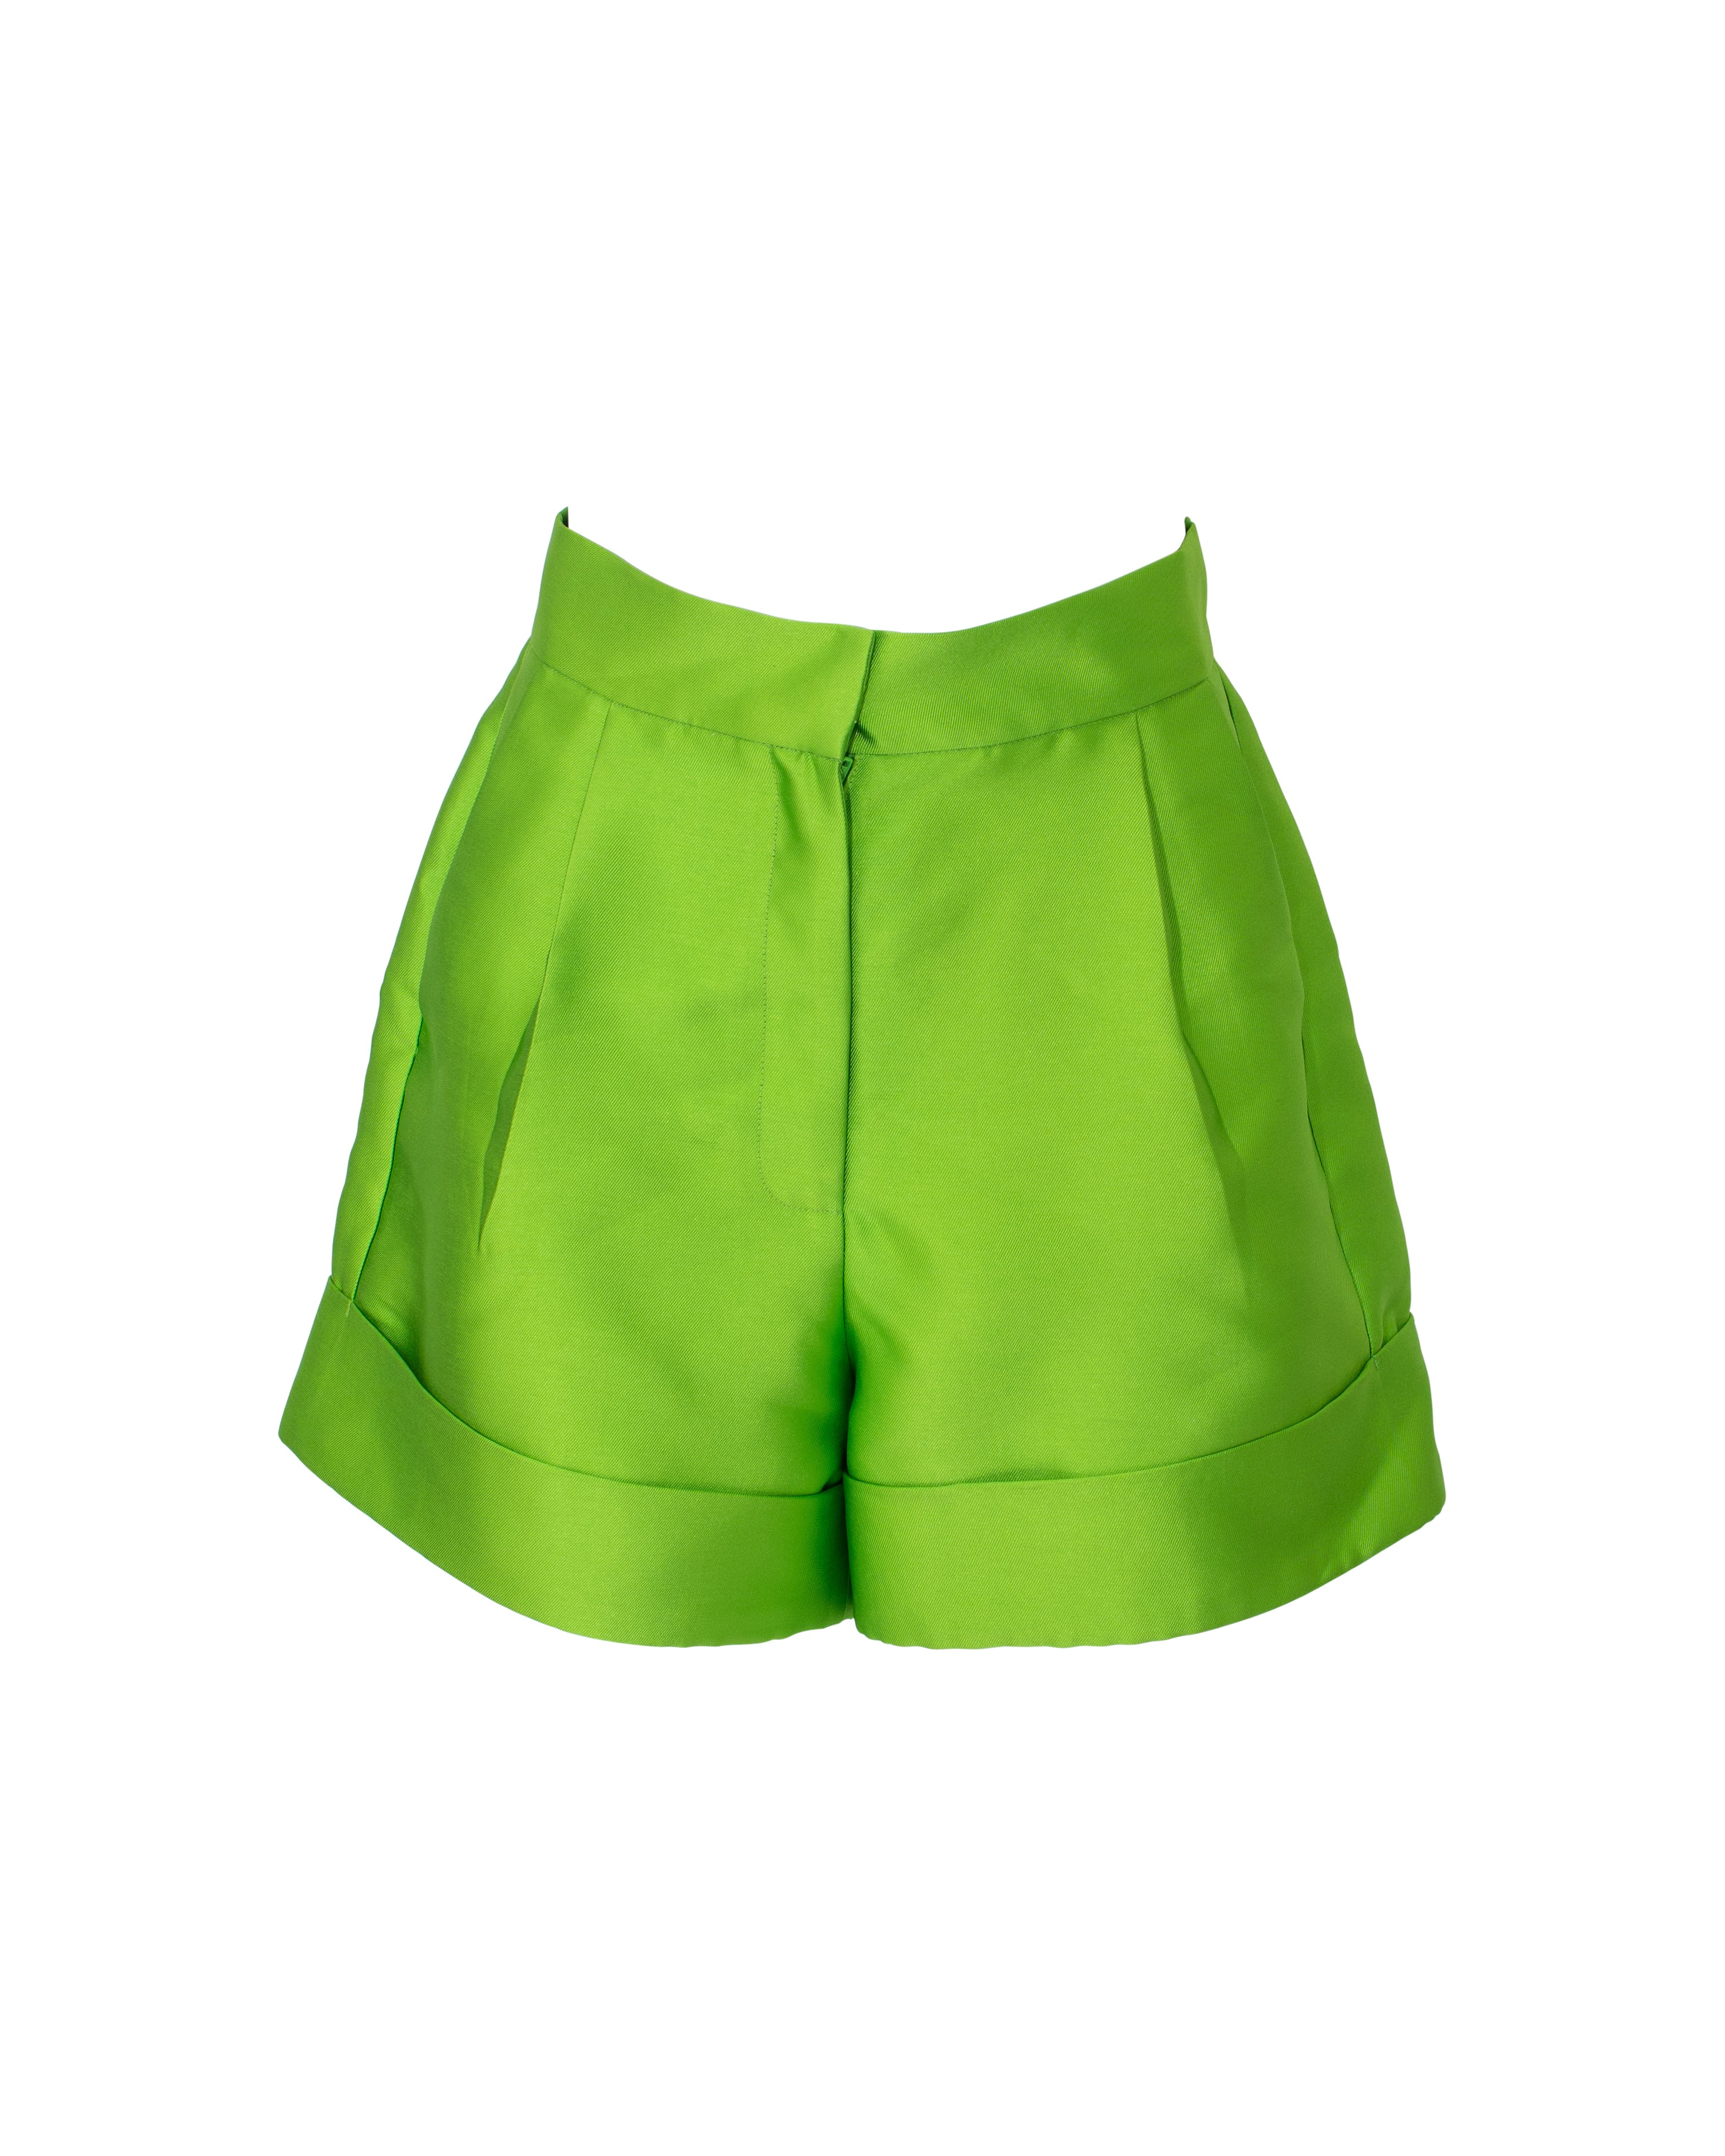 Our Grass is Greener - Shorts – The BRAND Label